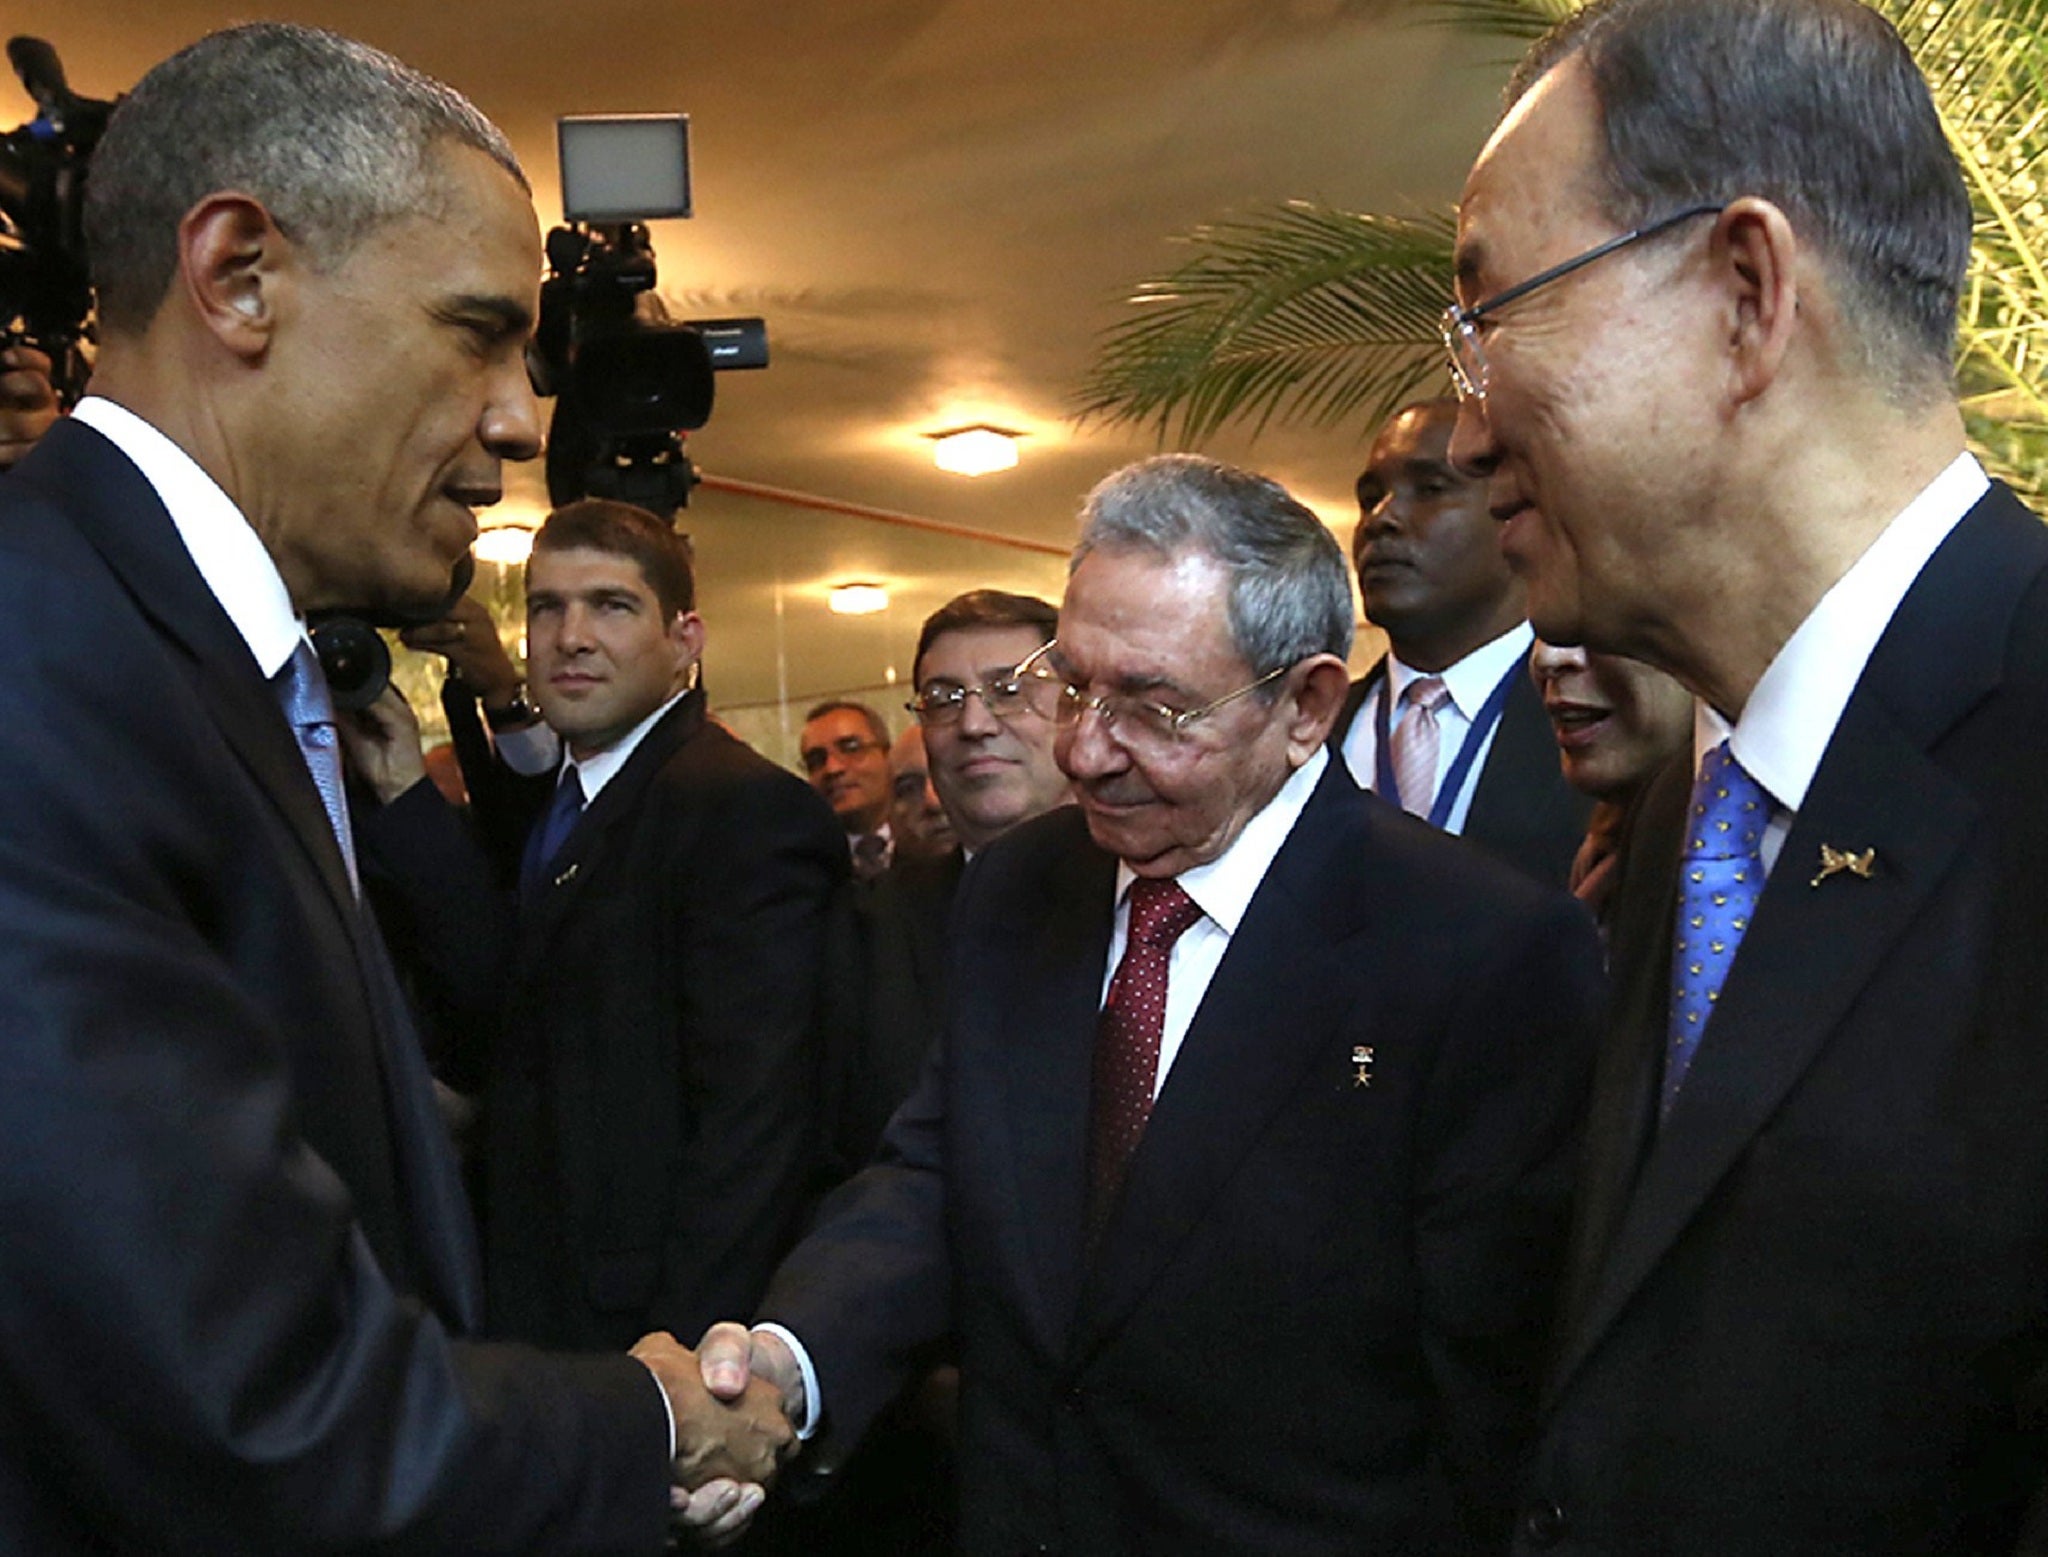 Raul Castro and Barack Obama shake hands at the Summit of the Americas